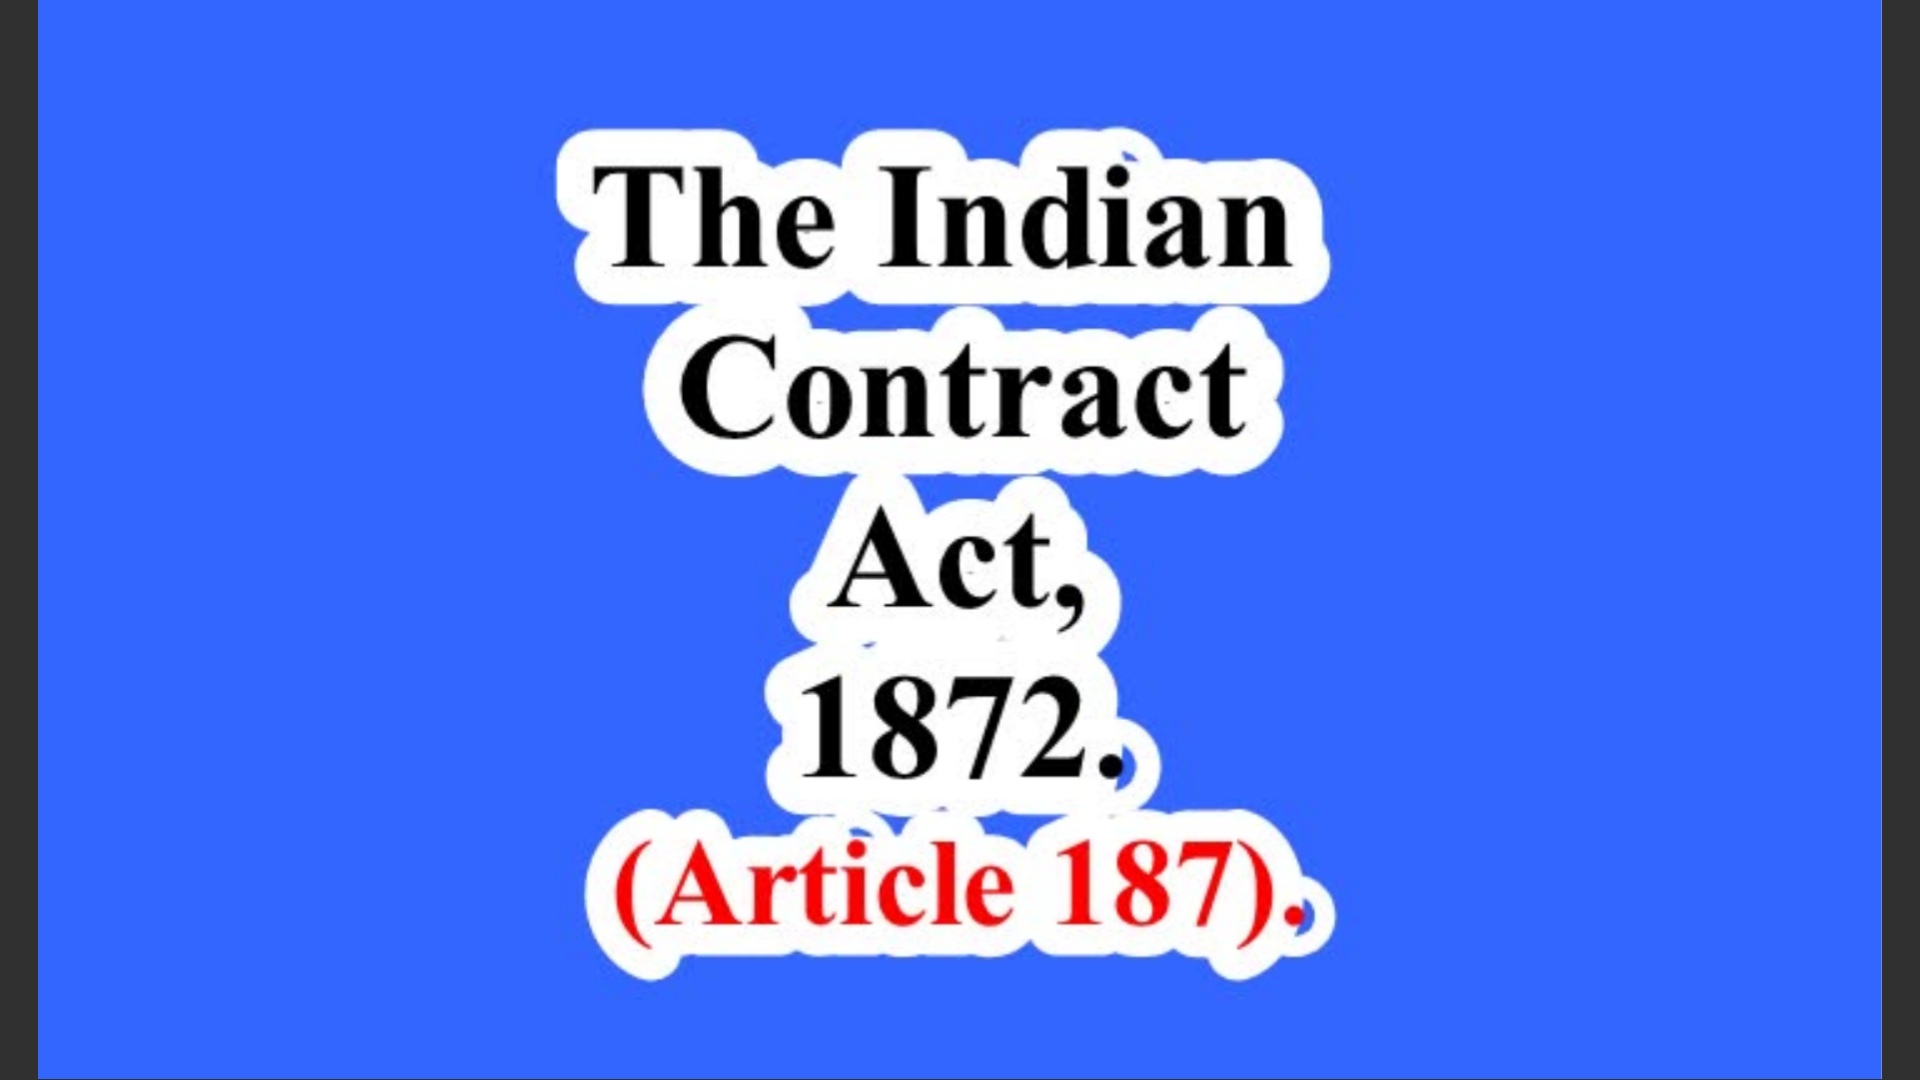 The Indian Contract Act, 1872. (Article 187).